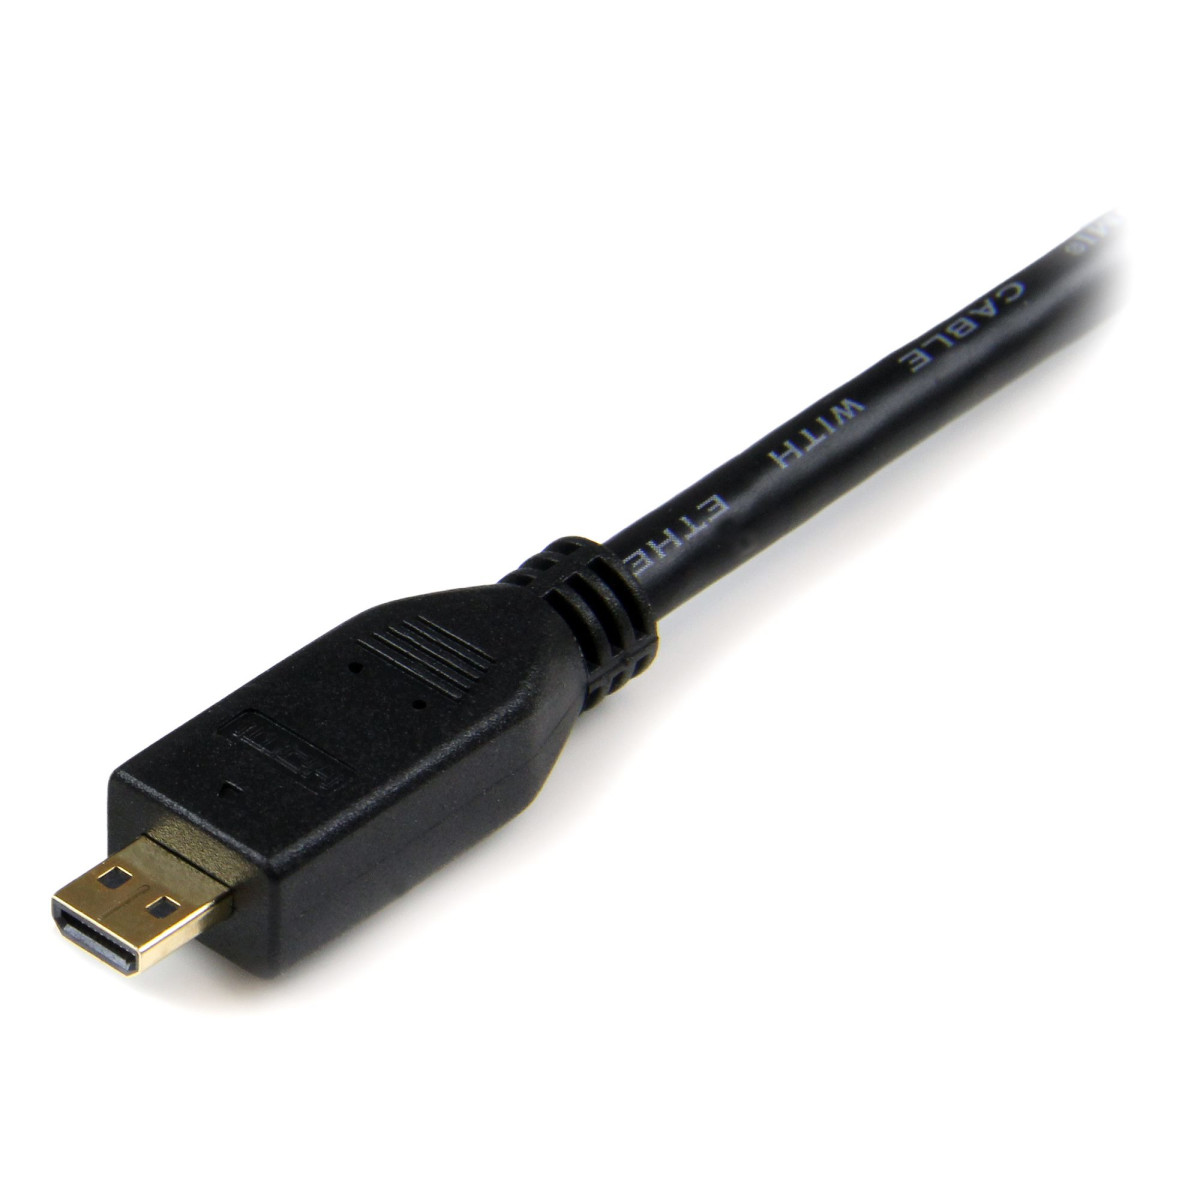 3m High Speed HDMI Cable with Ethernet